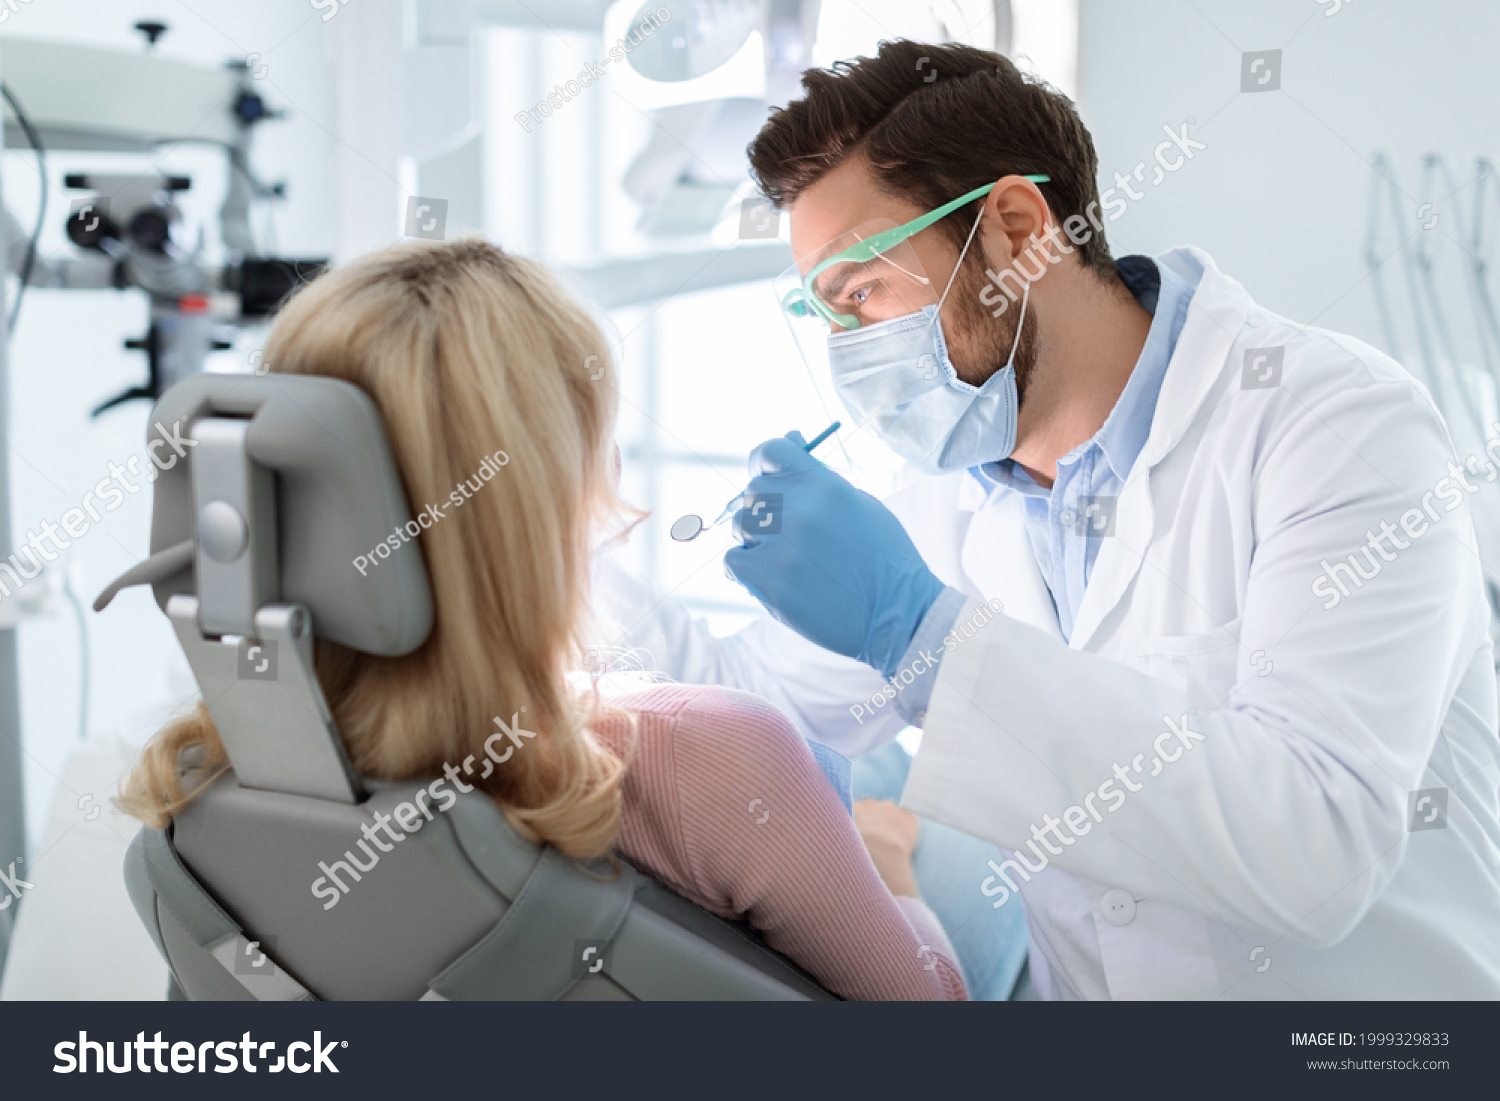 Man dentist in face mask and glasses doing treatment for patient blonde lady, holding dental tools, wearing rubber gloves. Stomatology, dentistry, modern dental clinic concept #1999329833